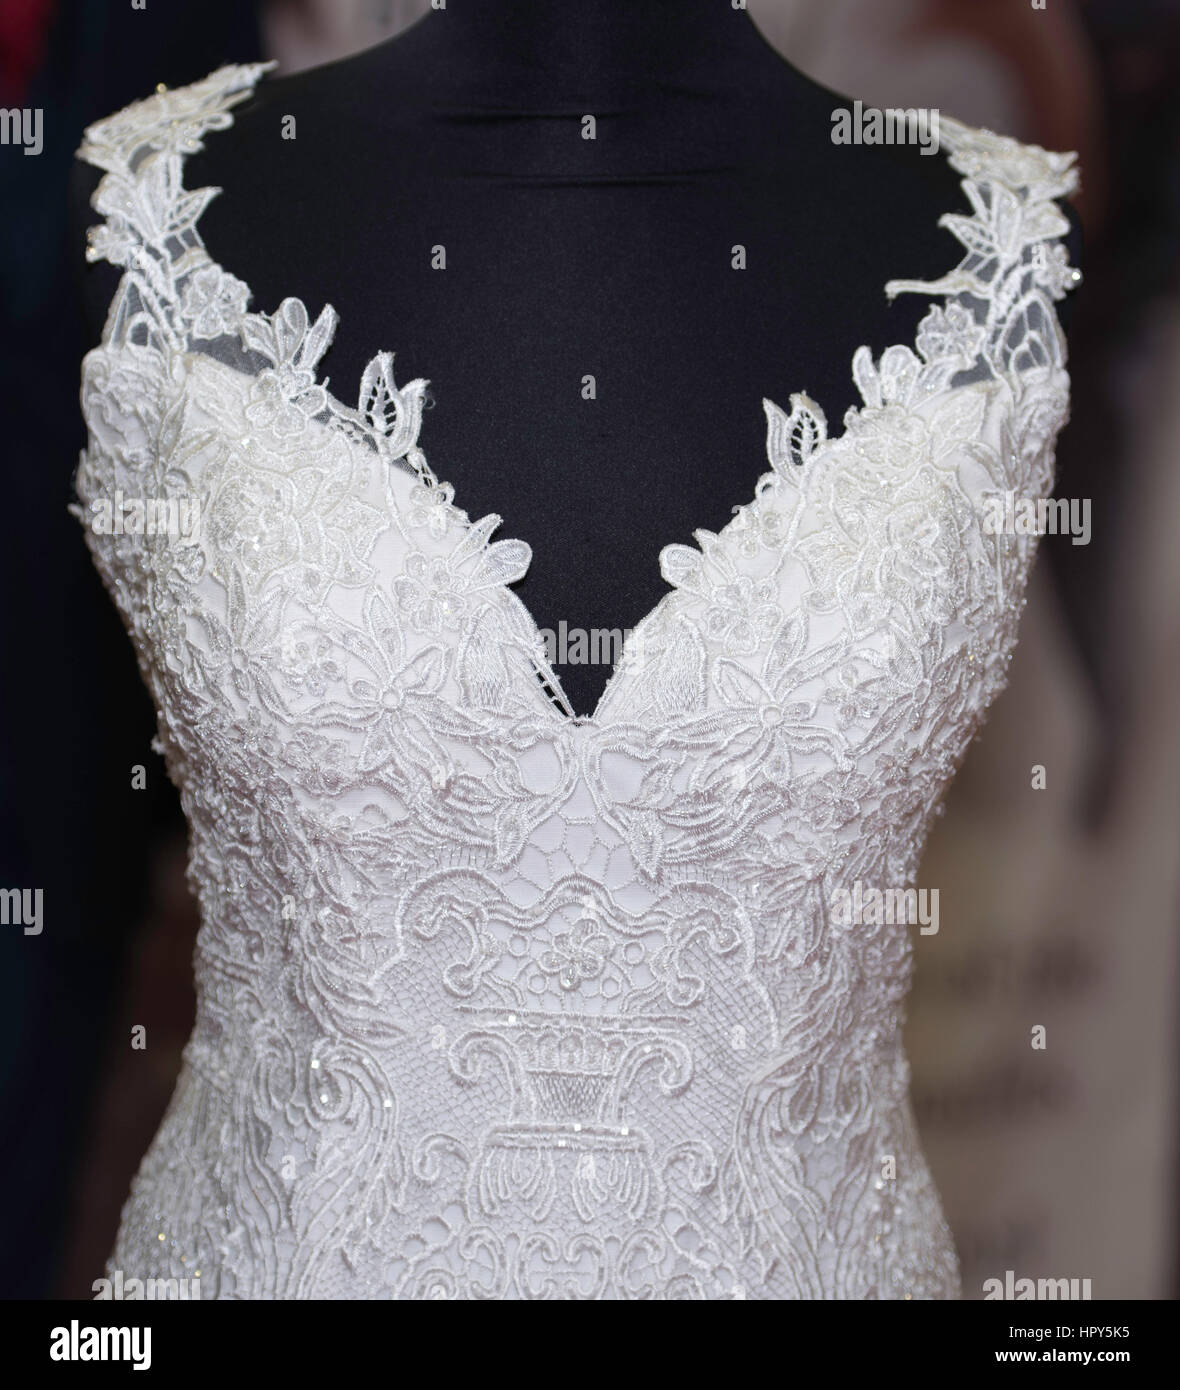 Bridal Gown with detail Stock Photo